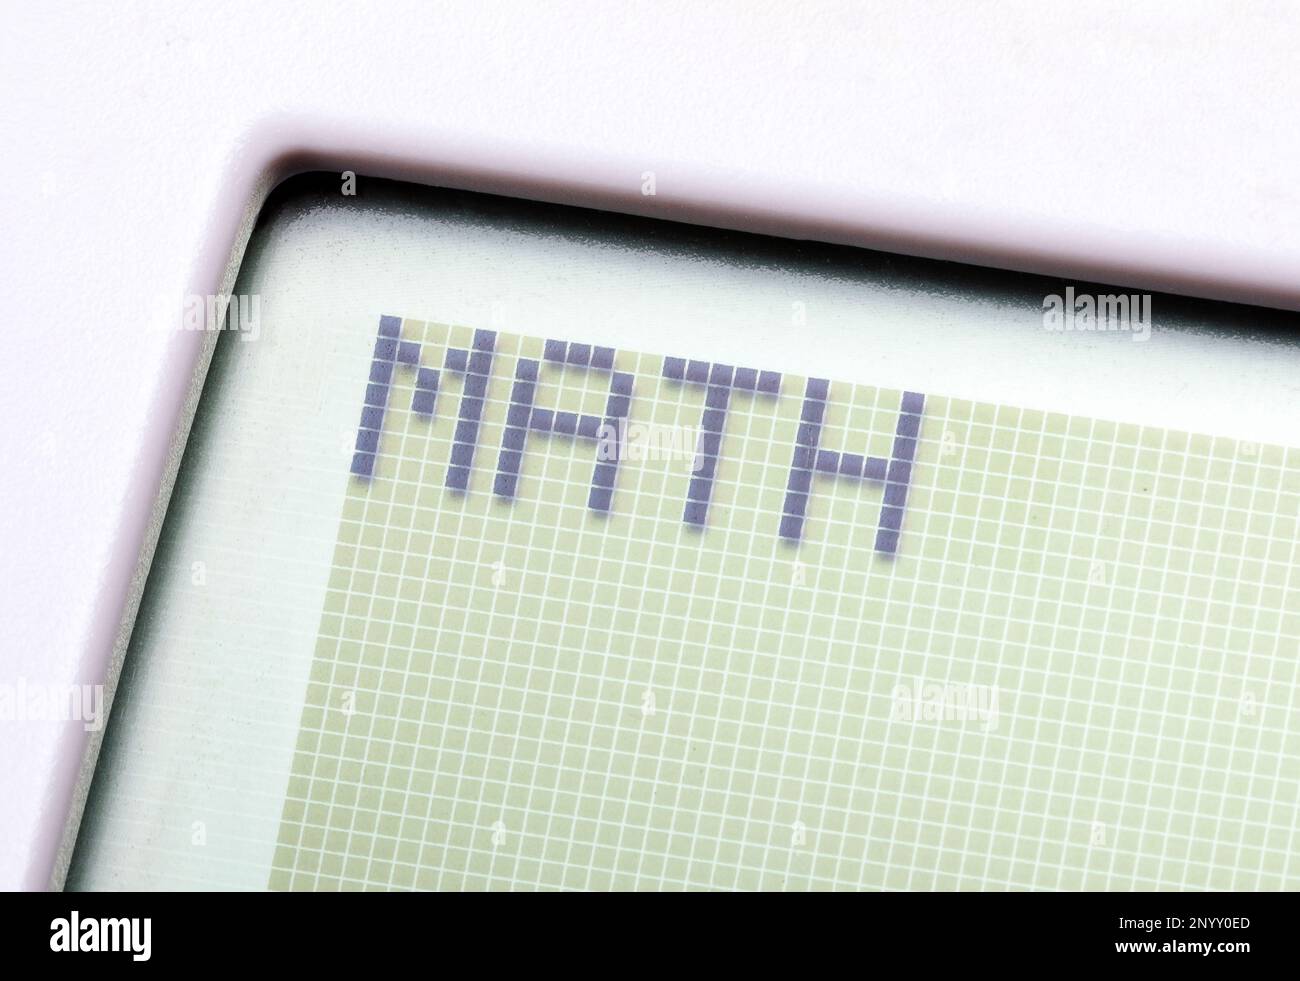 A single word MATH on a graphing calculator digital display, object macro, detail, extreme closeup, nobody. Mathematics, computer science and technolo Stock Photo